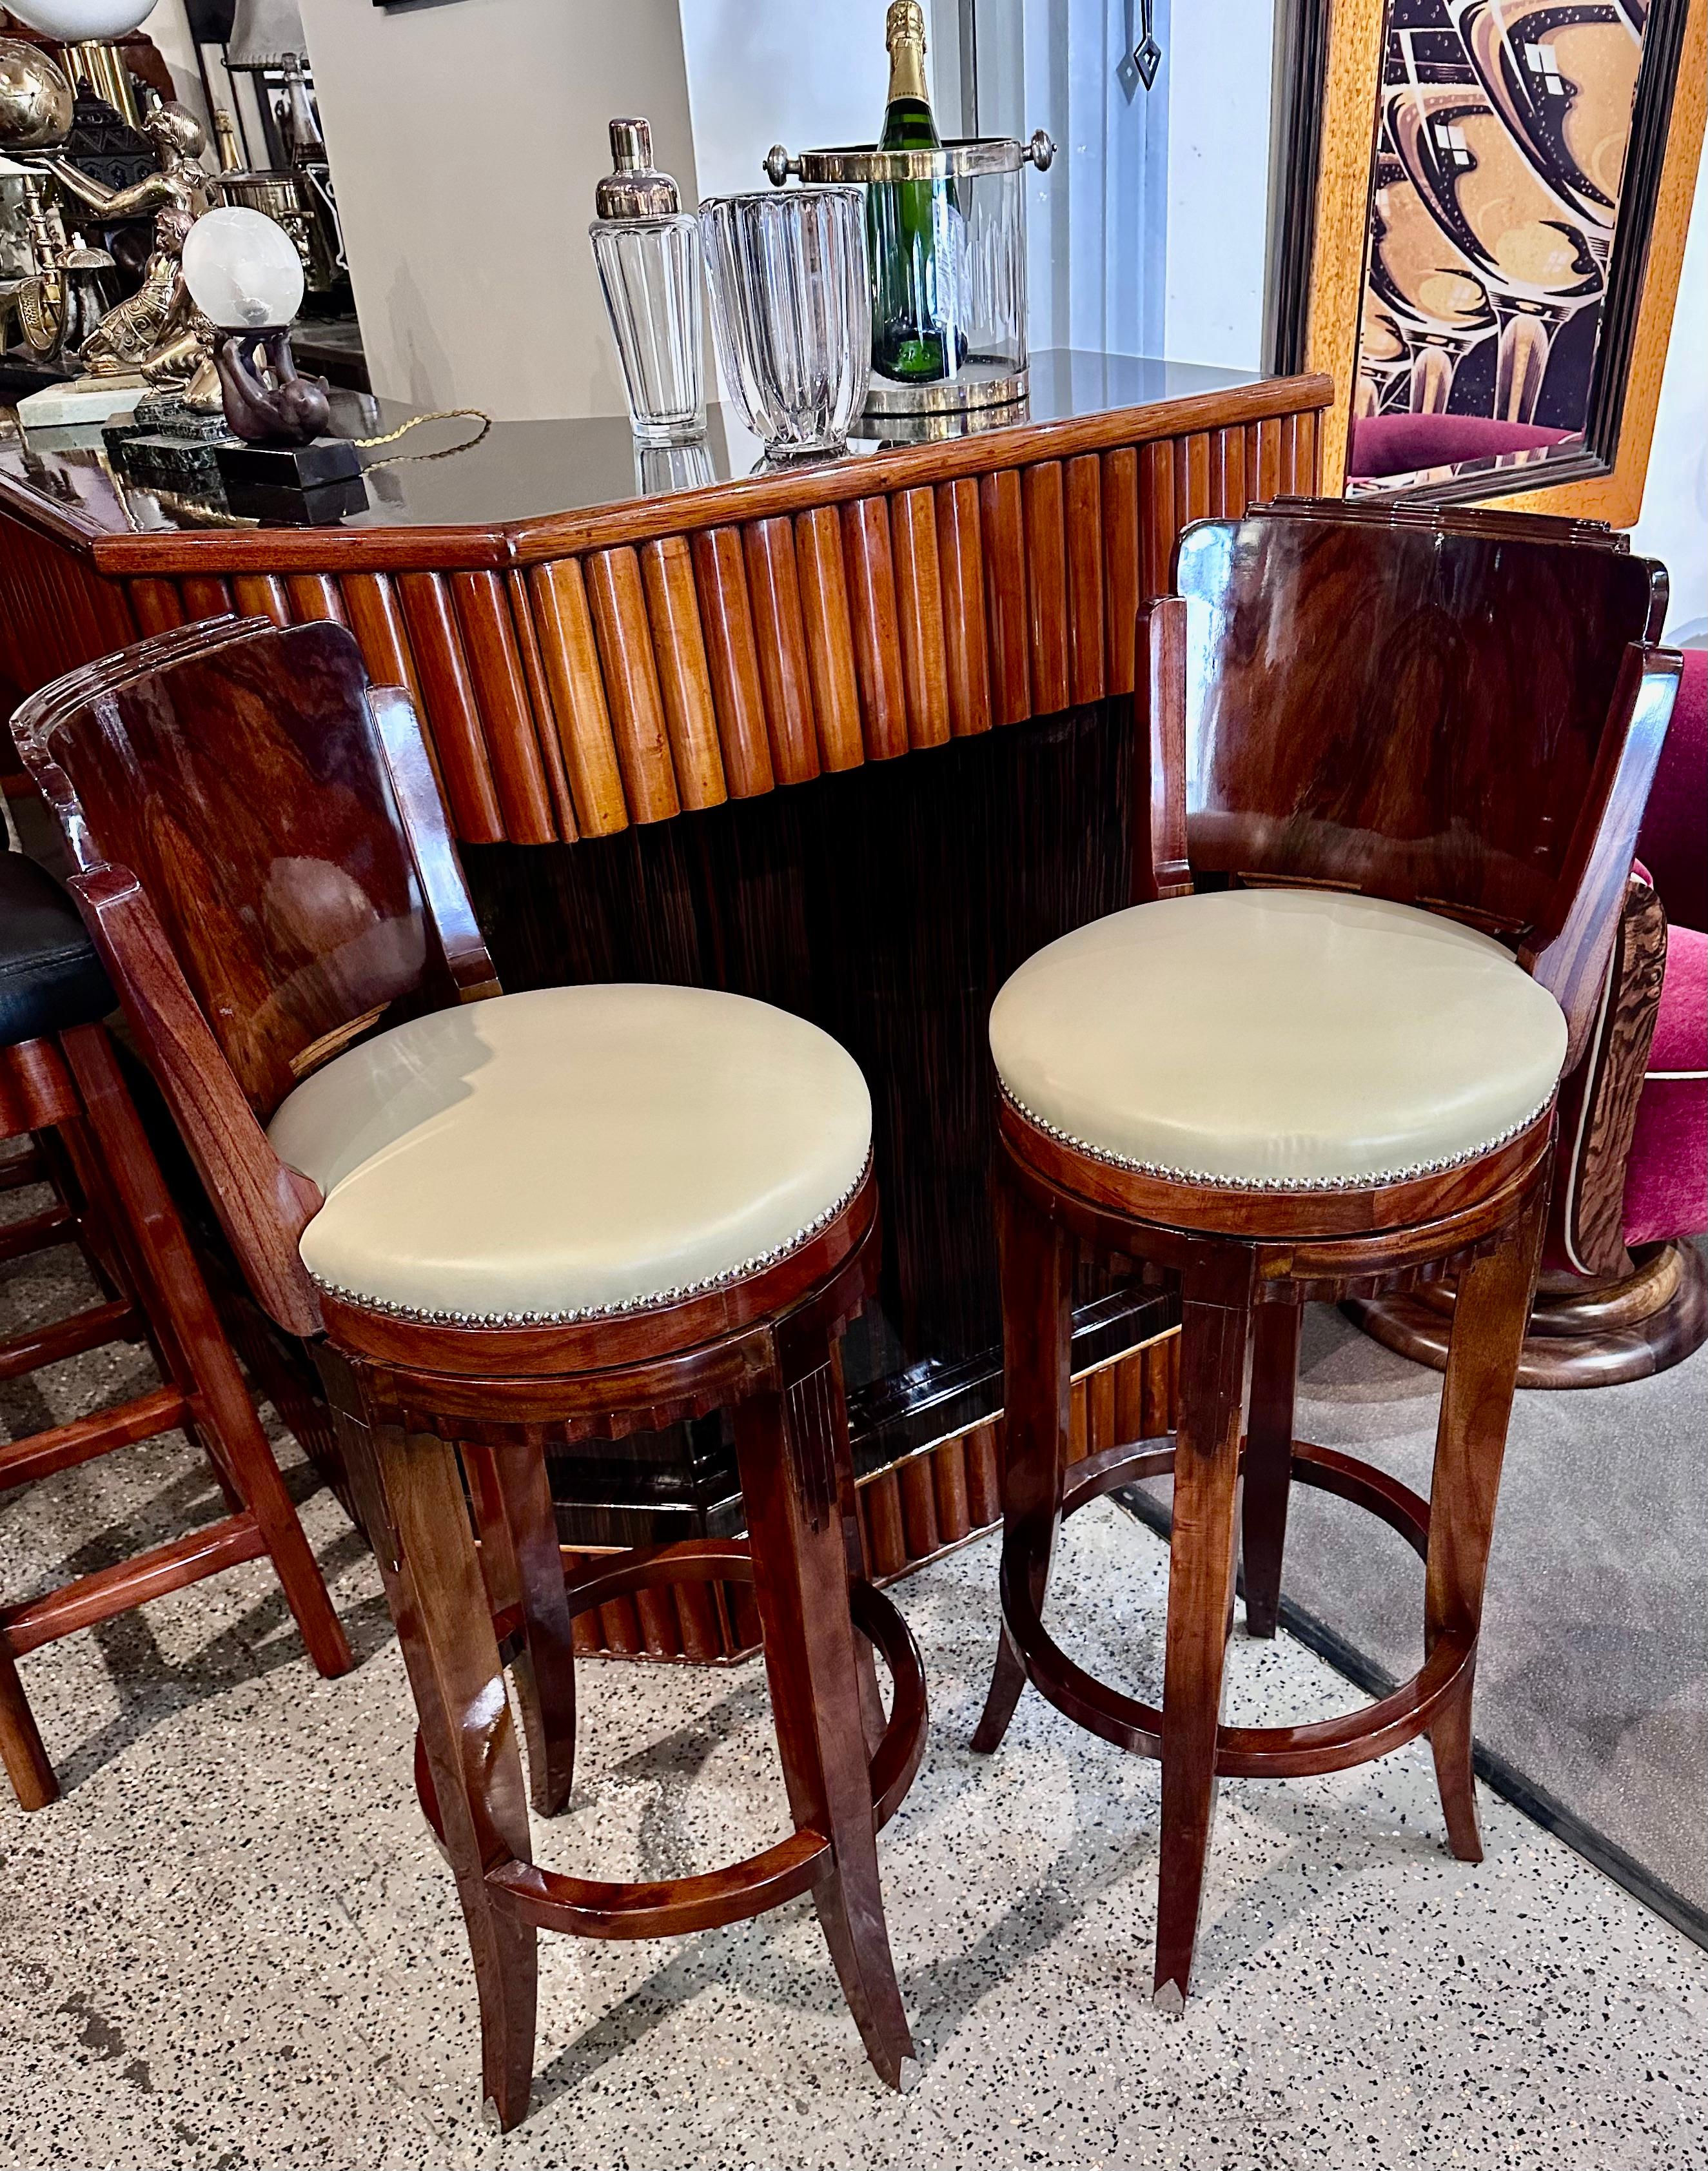 Custom Art Deco swivel wood barstool using exotic woods. Quality materials: French nails used for cream leather upholstery, and subtle contrasting woods pronounce some of the design details with the magnified beveled edge of intense walnut graining.